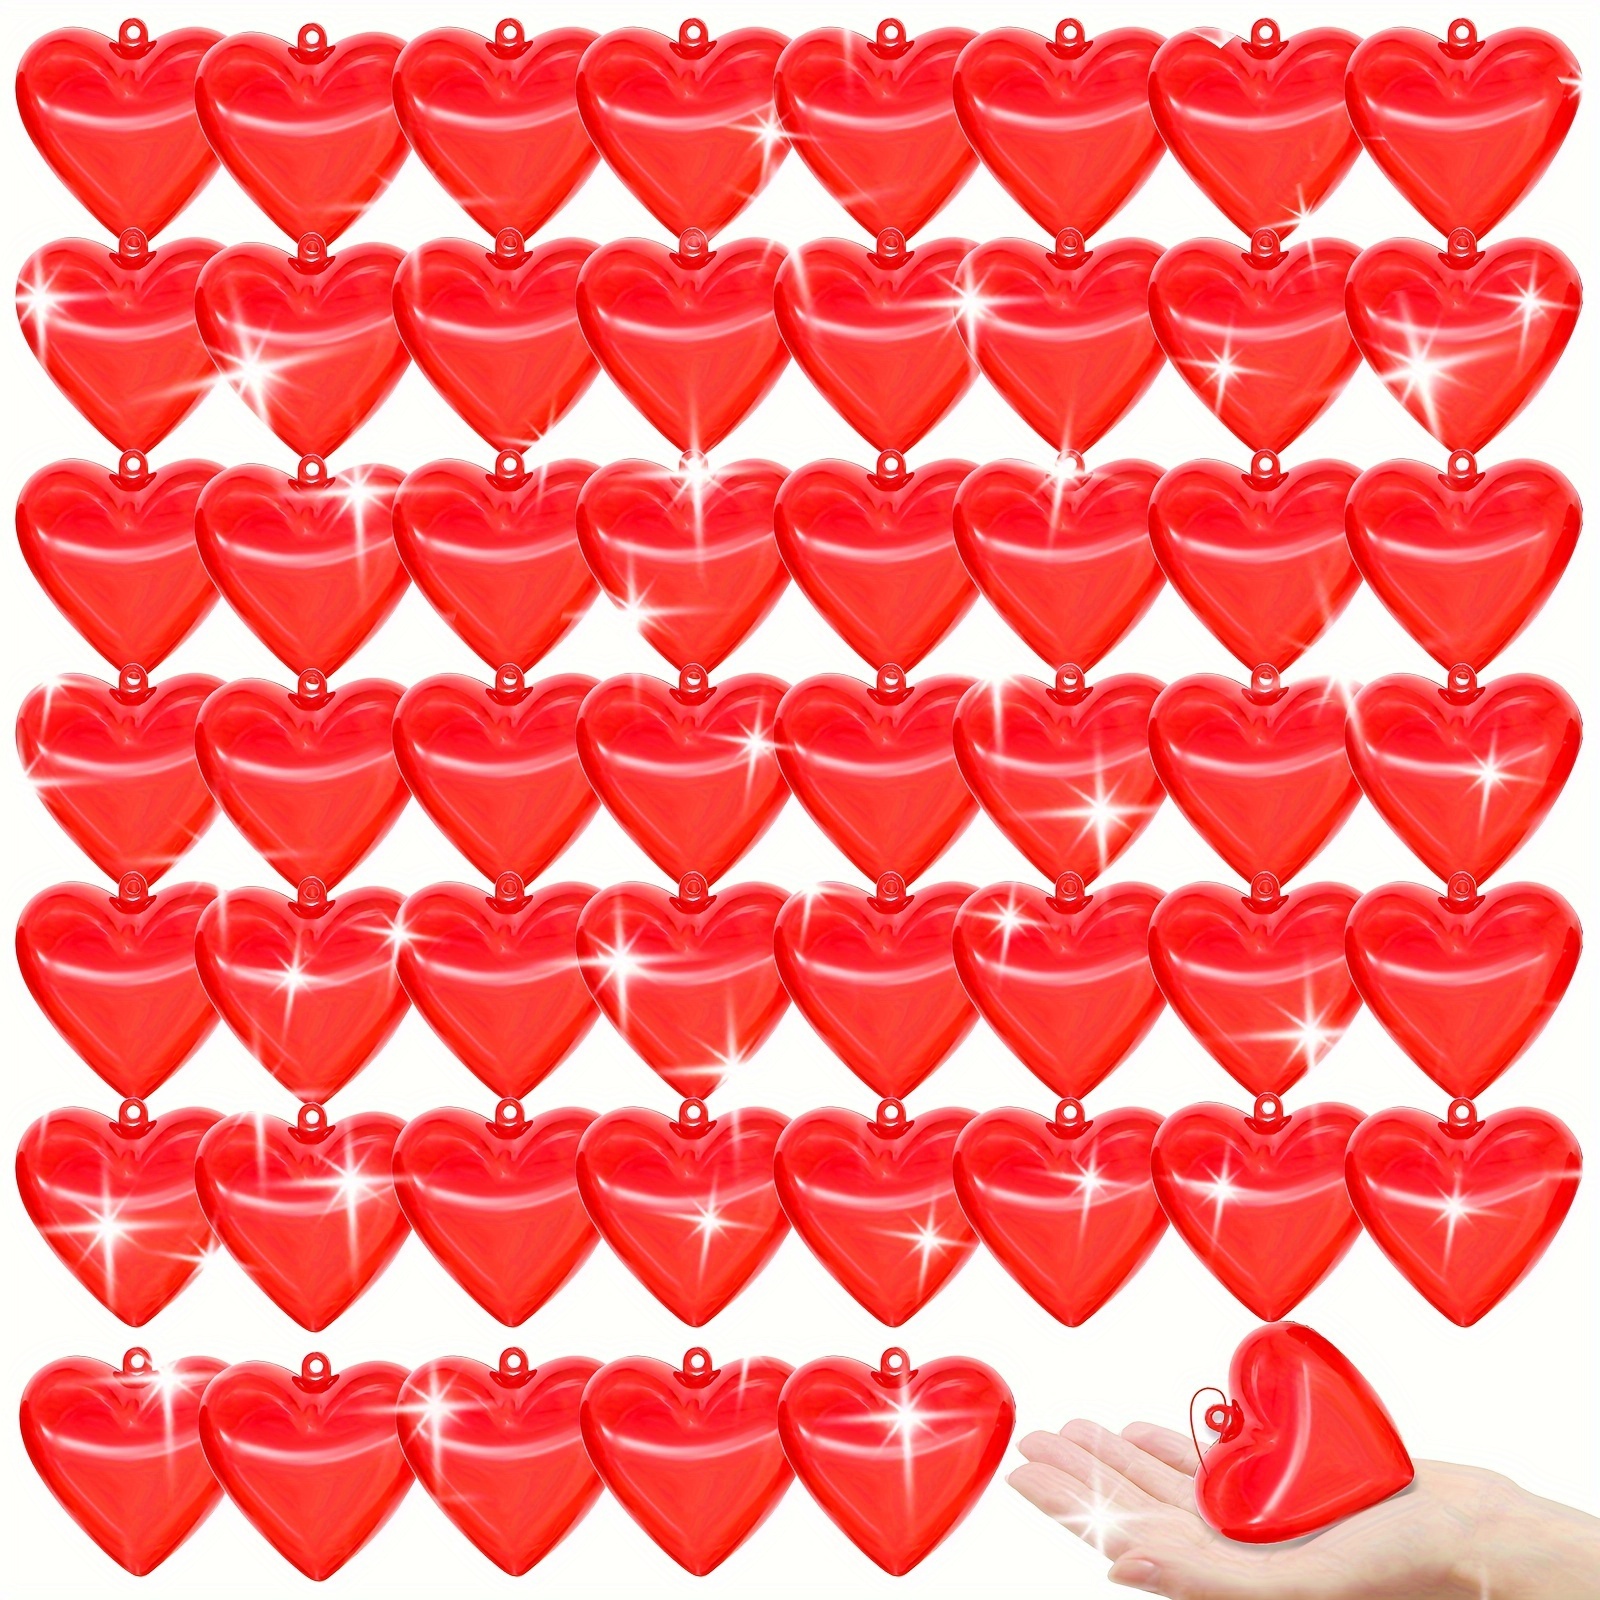 Wood Heart Cutouts Wood Heart Slices Embellishments Ornaments for Wedding  Valentine Birthday Party DIY Holiday Home Decoration